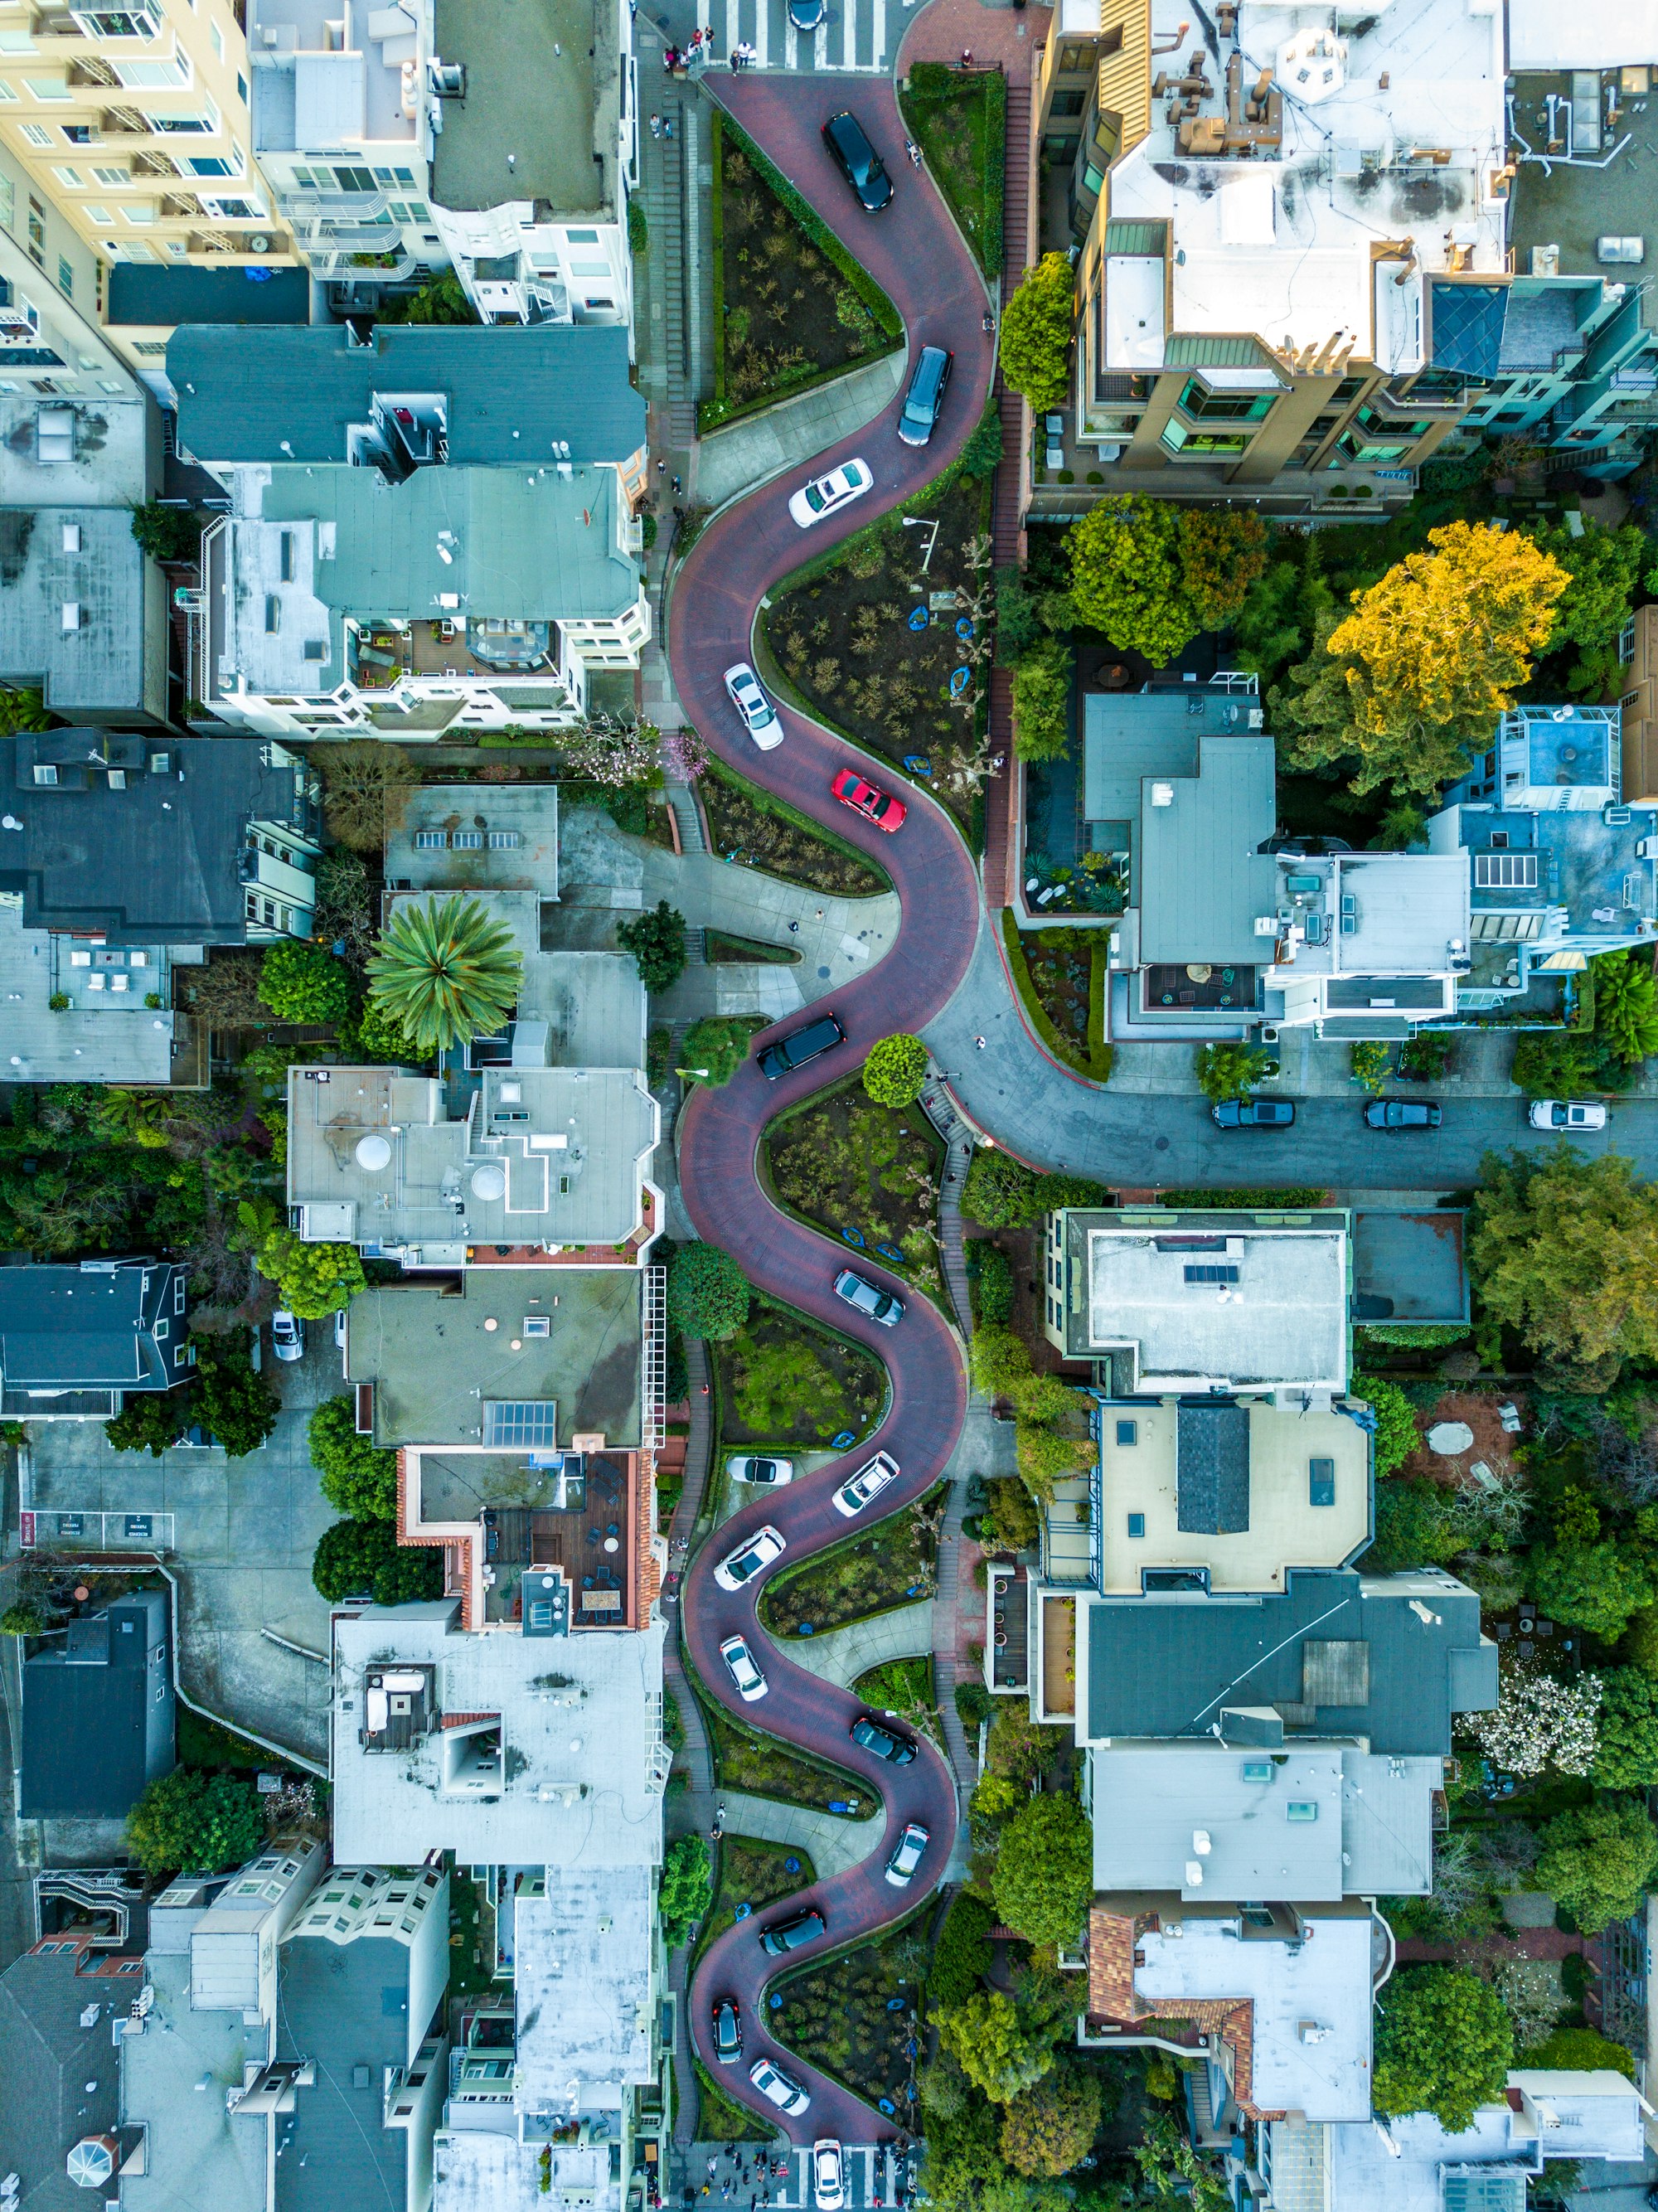 While visiting San Francisco, i thought an aerial view of this crazy street would look cool. Turned out to be an awesome shot!